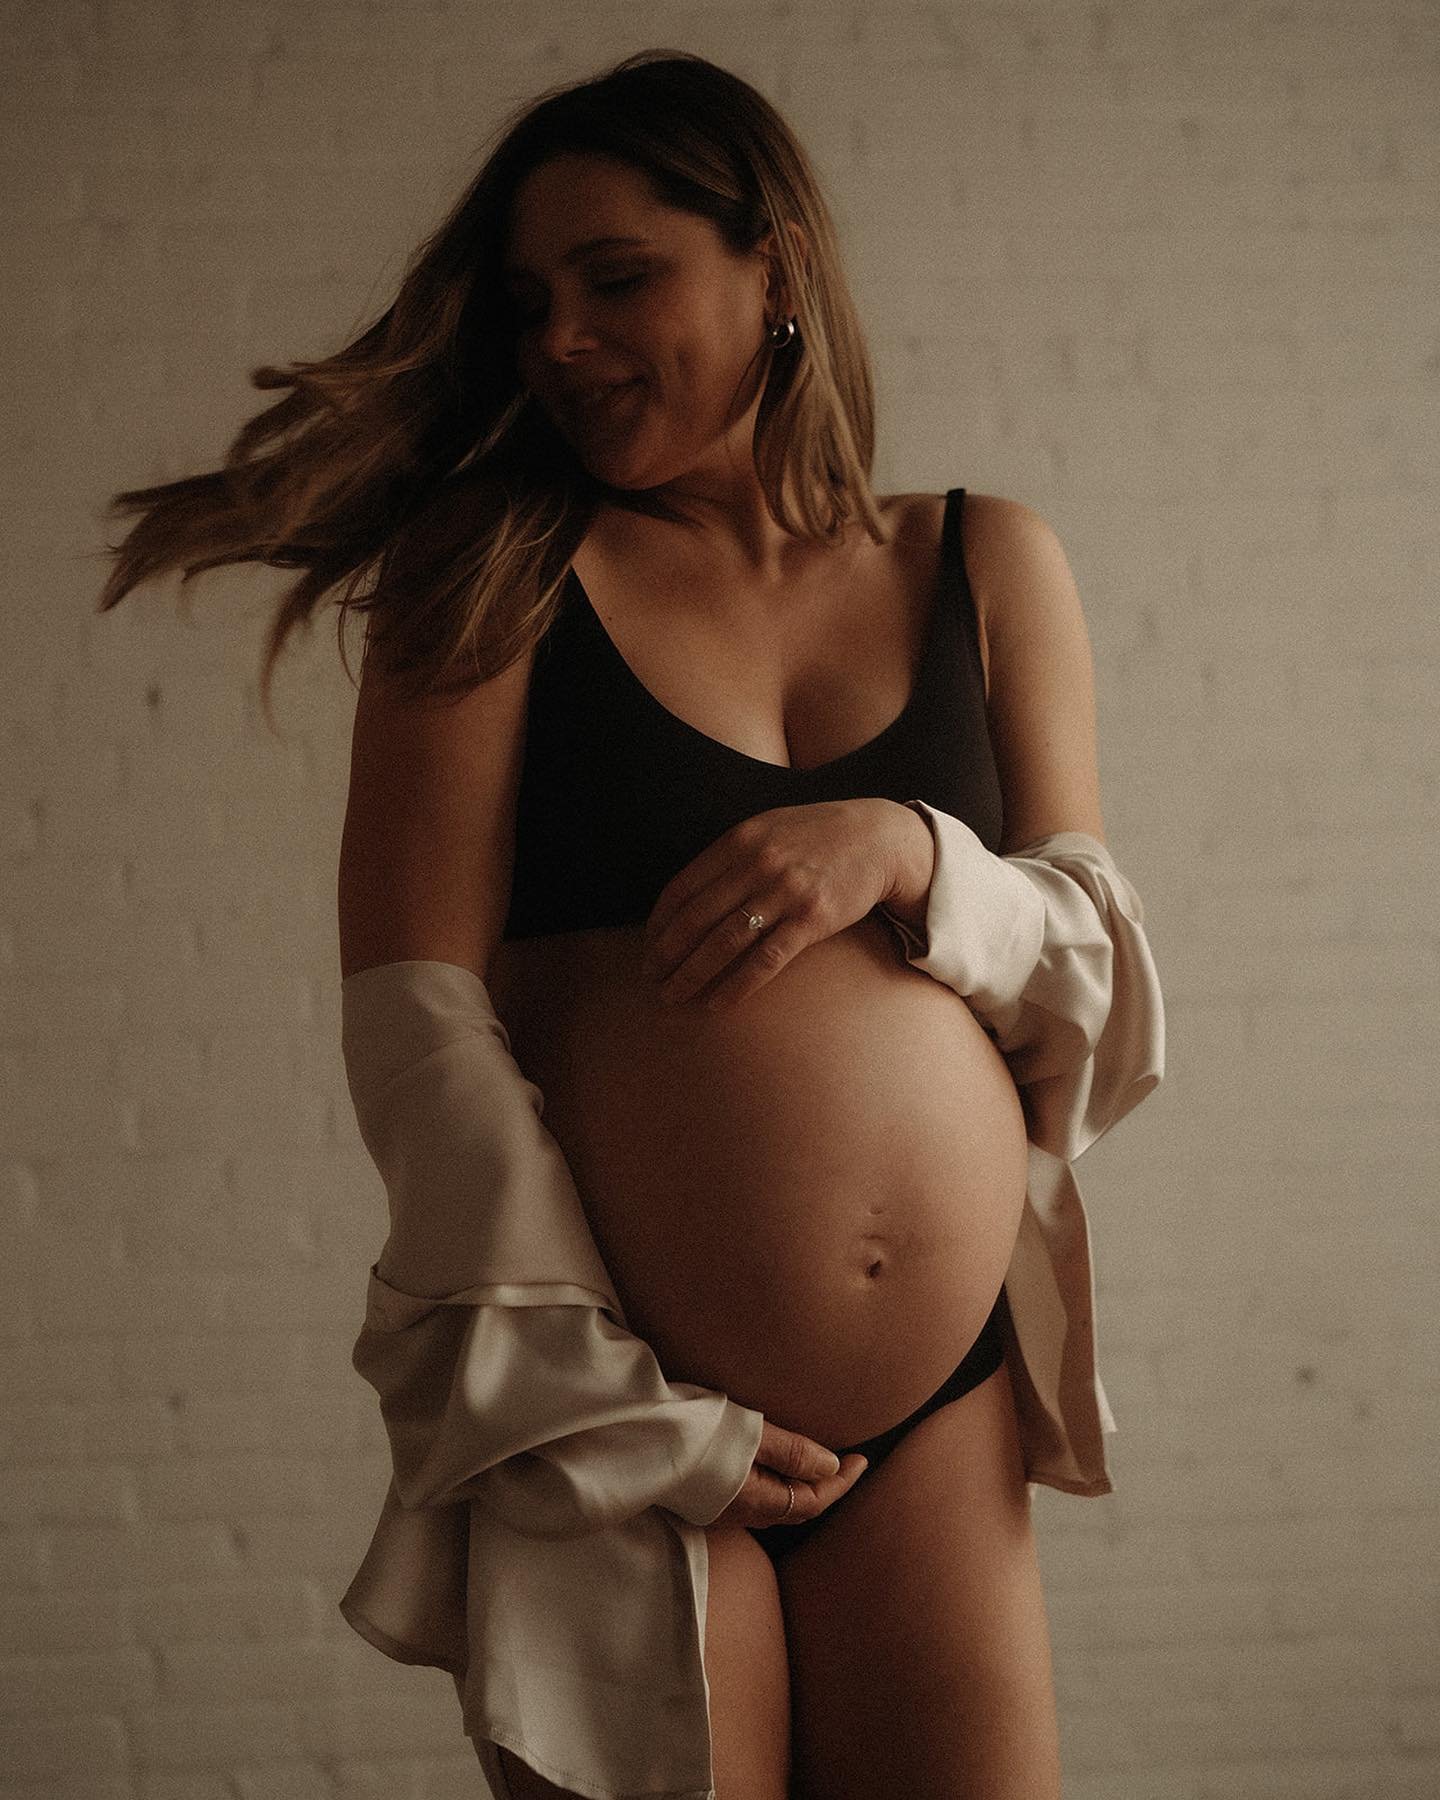 I was 36 weeks pregnant here and my daughter is already 2 months old&hellip; time is a thief. Grateful for these beautiful maternity photos during such a finite time of life. Kate is a true magic maker @katejensenphoto